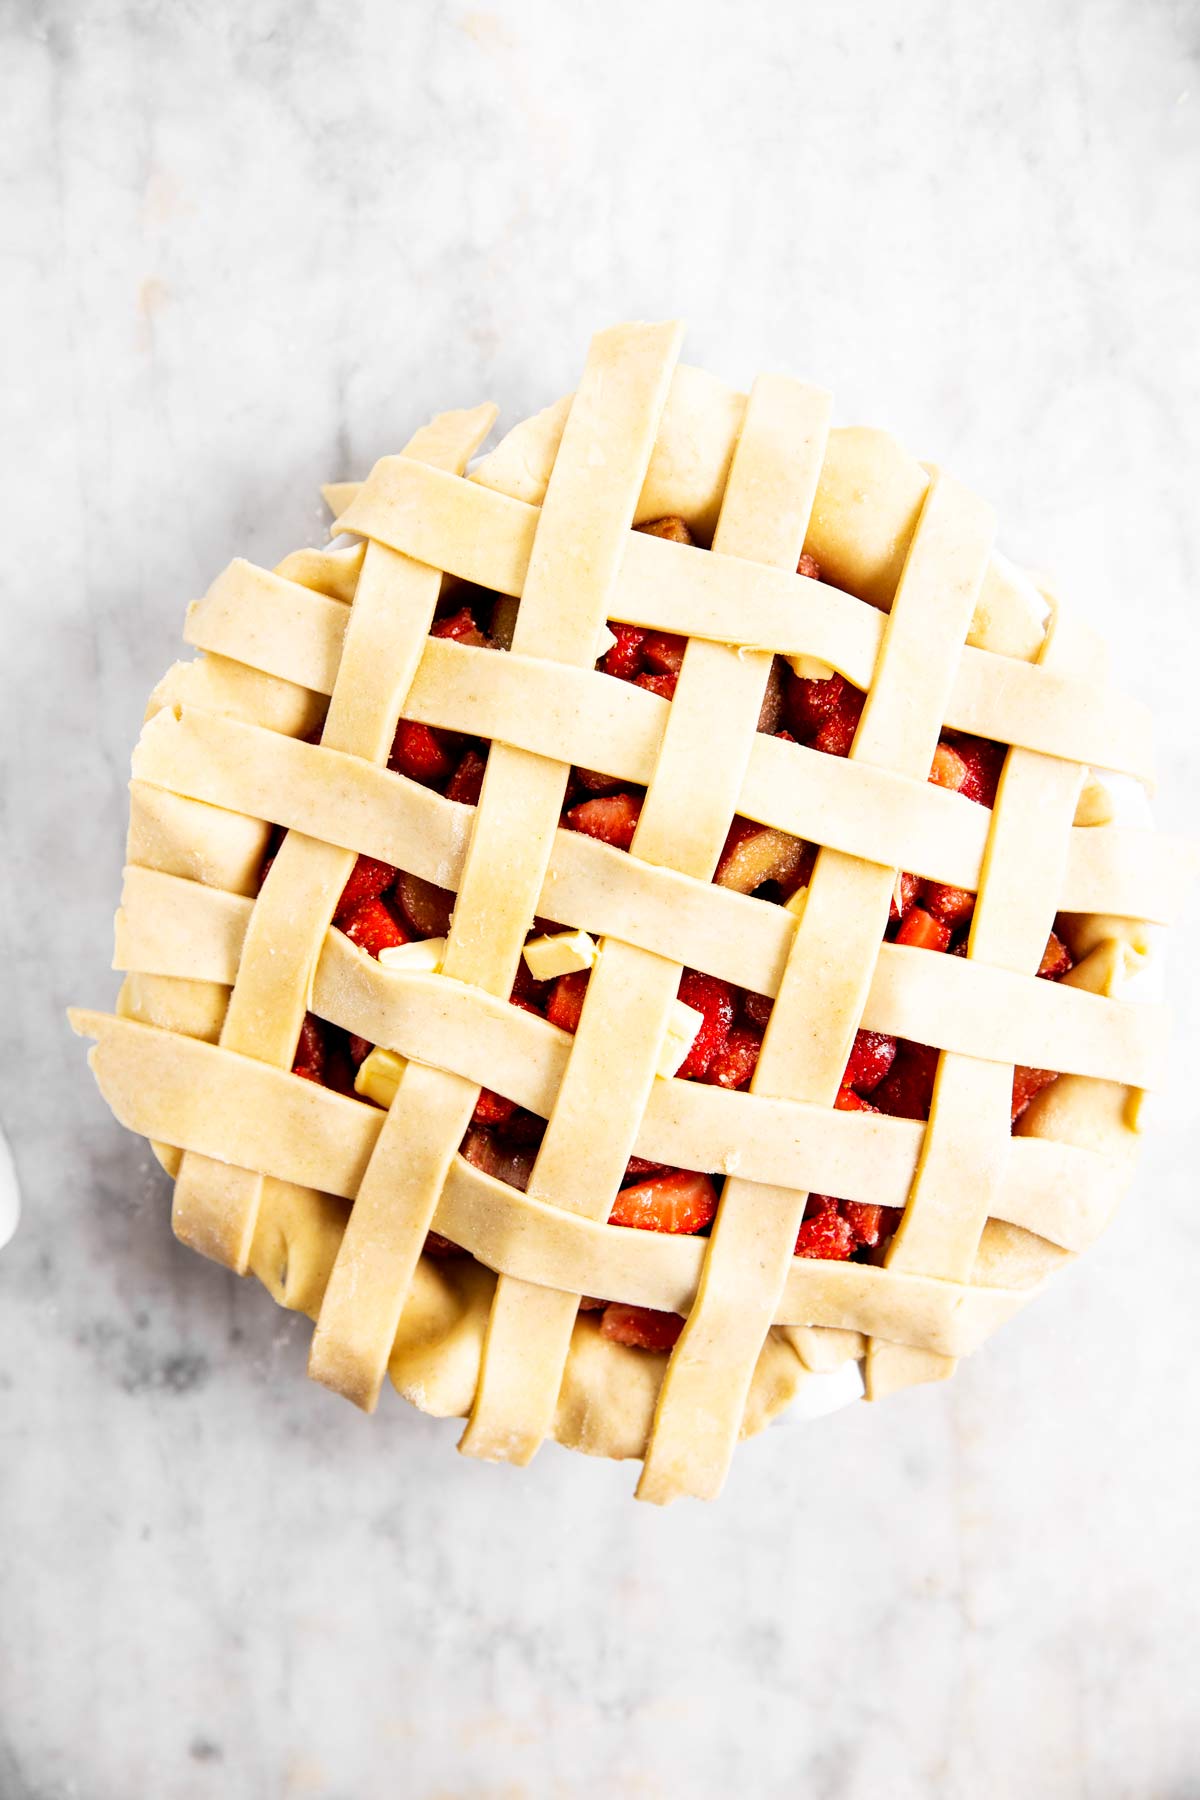 fifth step of lattice crust weave on top of strawberry rhubarb pie